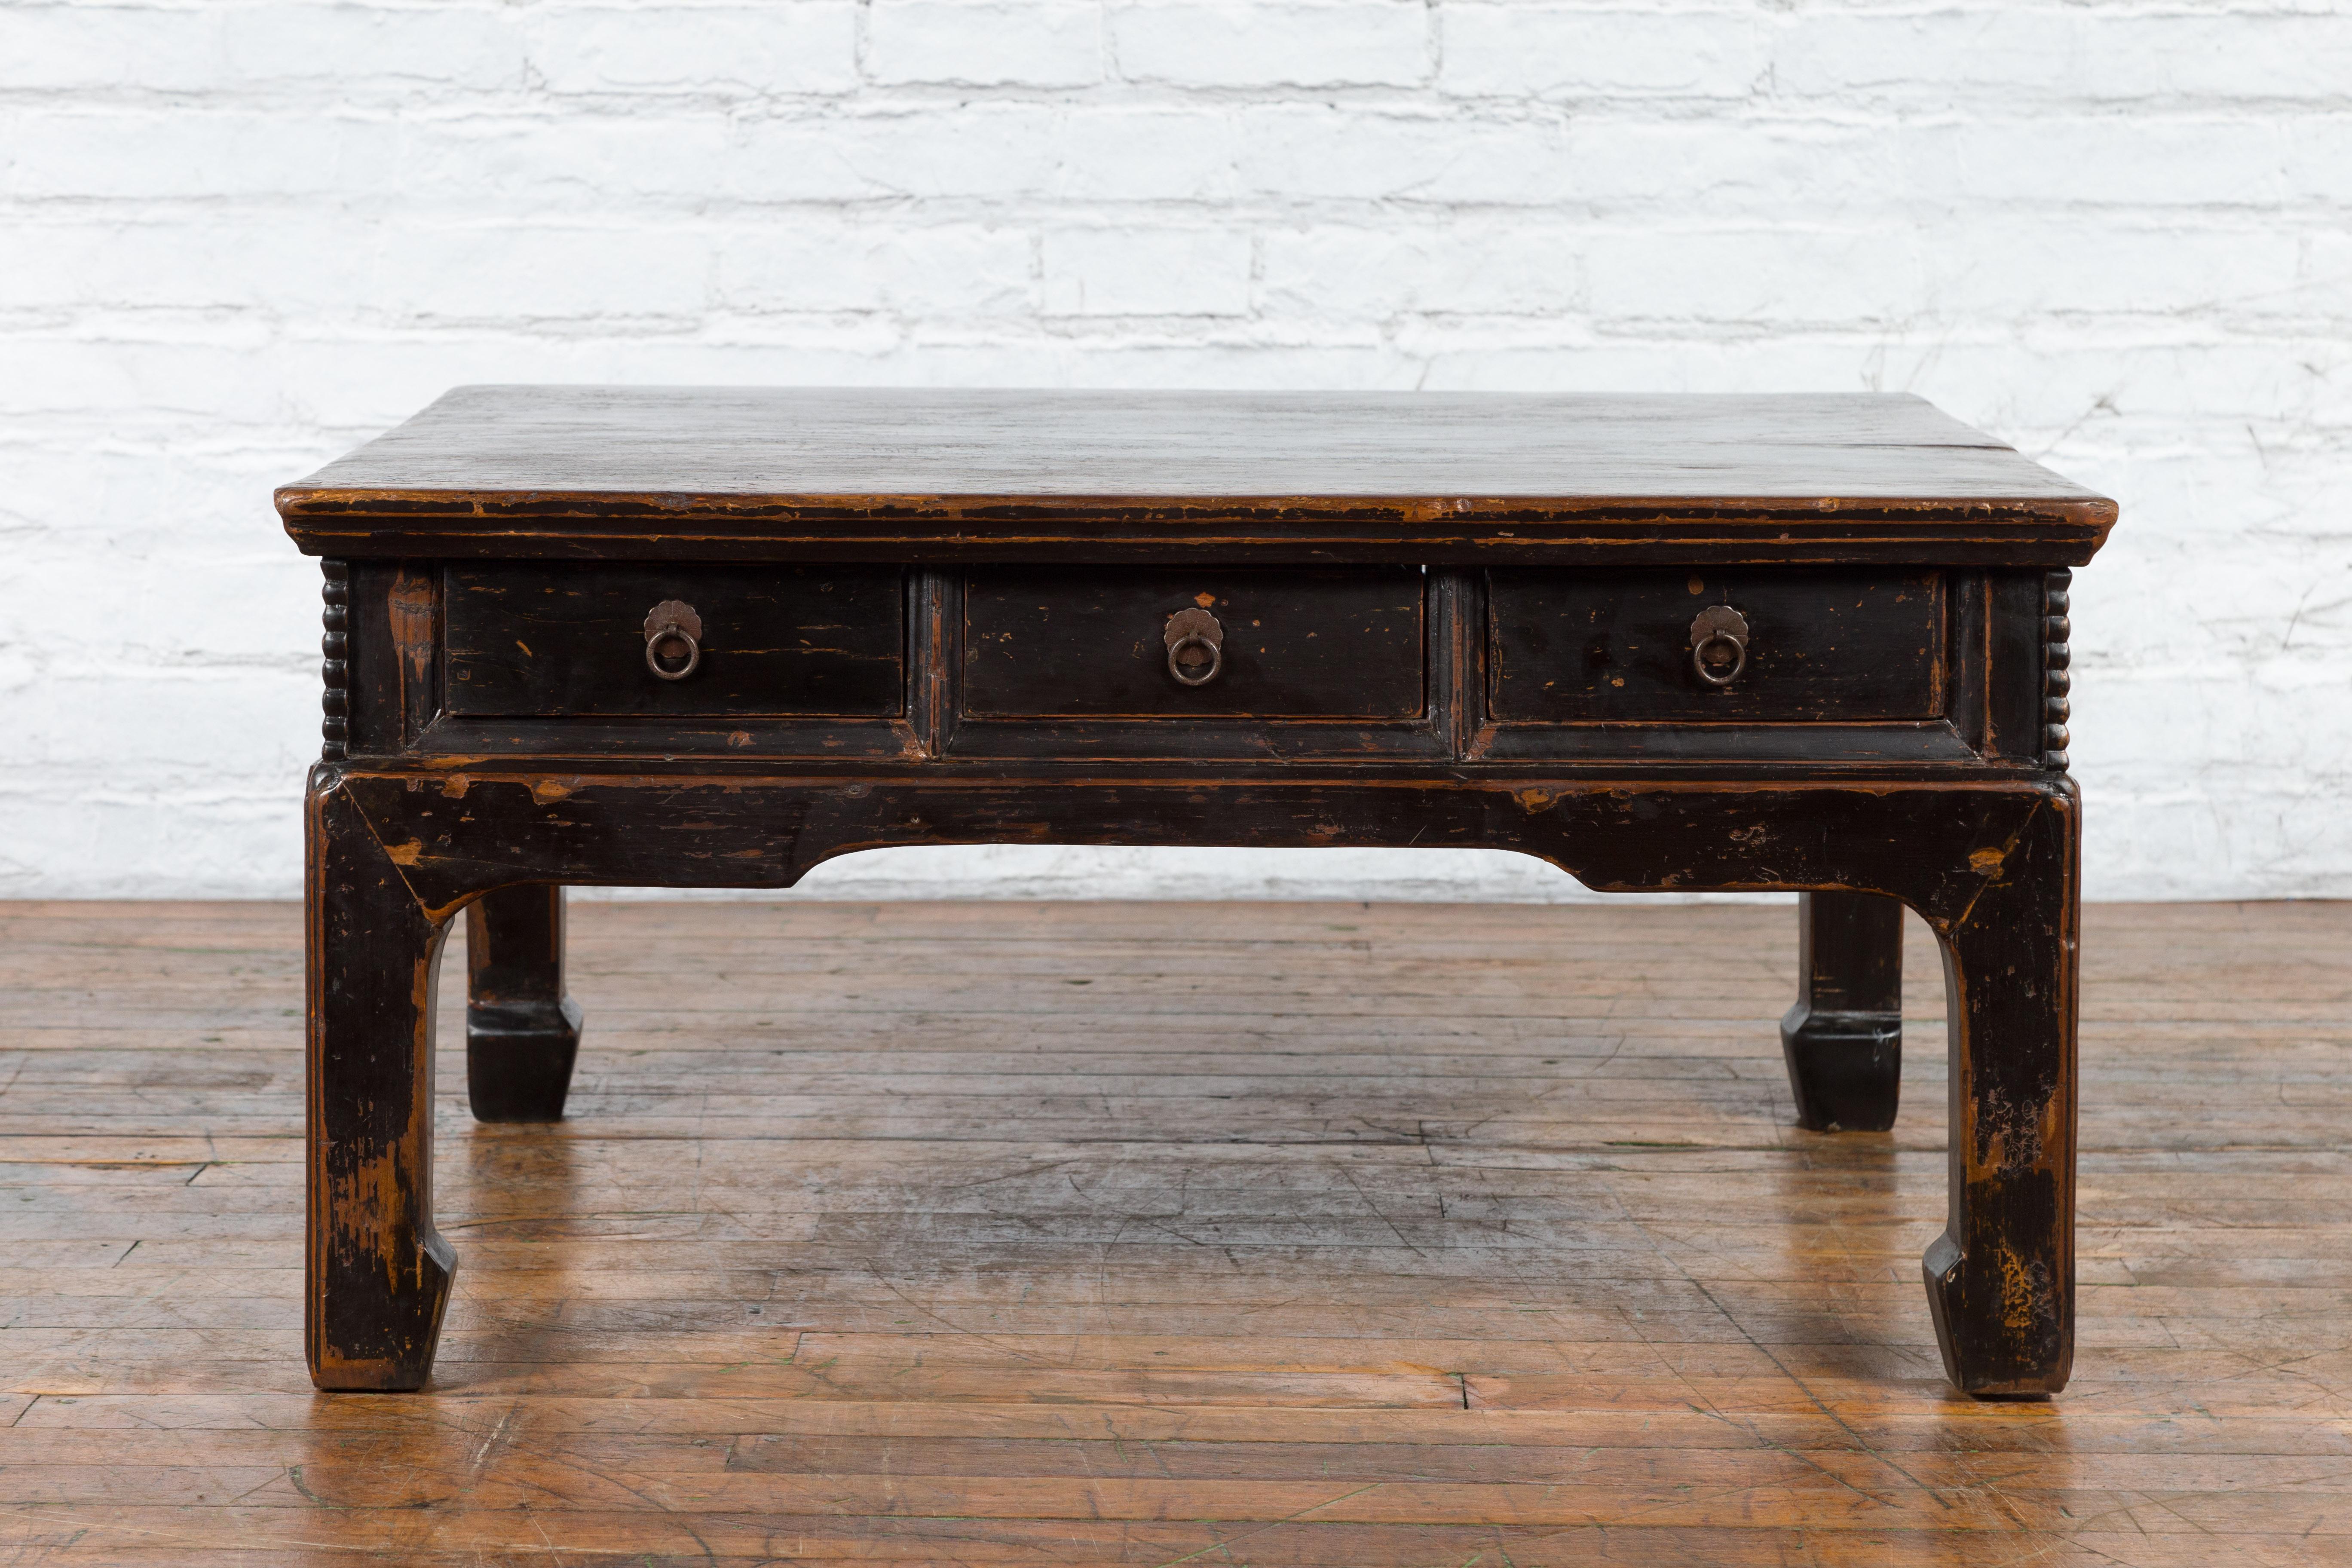 An Chinese Qing Dynasty period low coffee table from the 19th century with original rubbed patina and six drawers. Created in China during the Qing Dynasty (1636–1912), this low table, which could nowadays be used as a coffee table (the Chinese